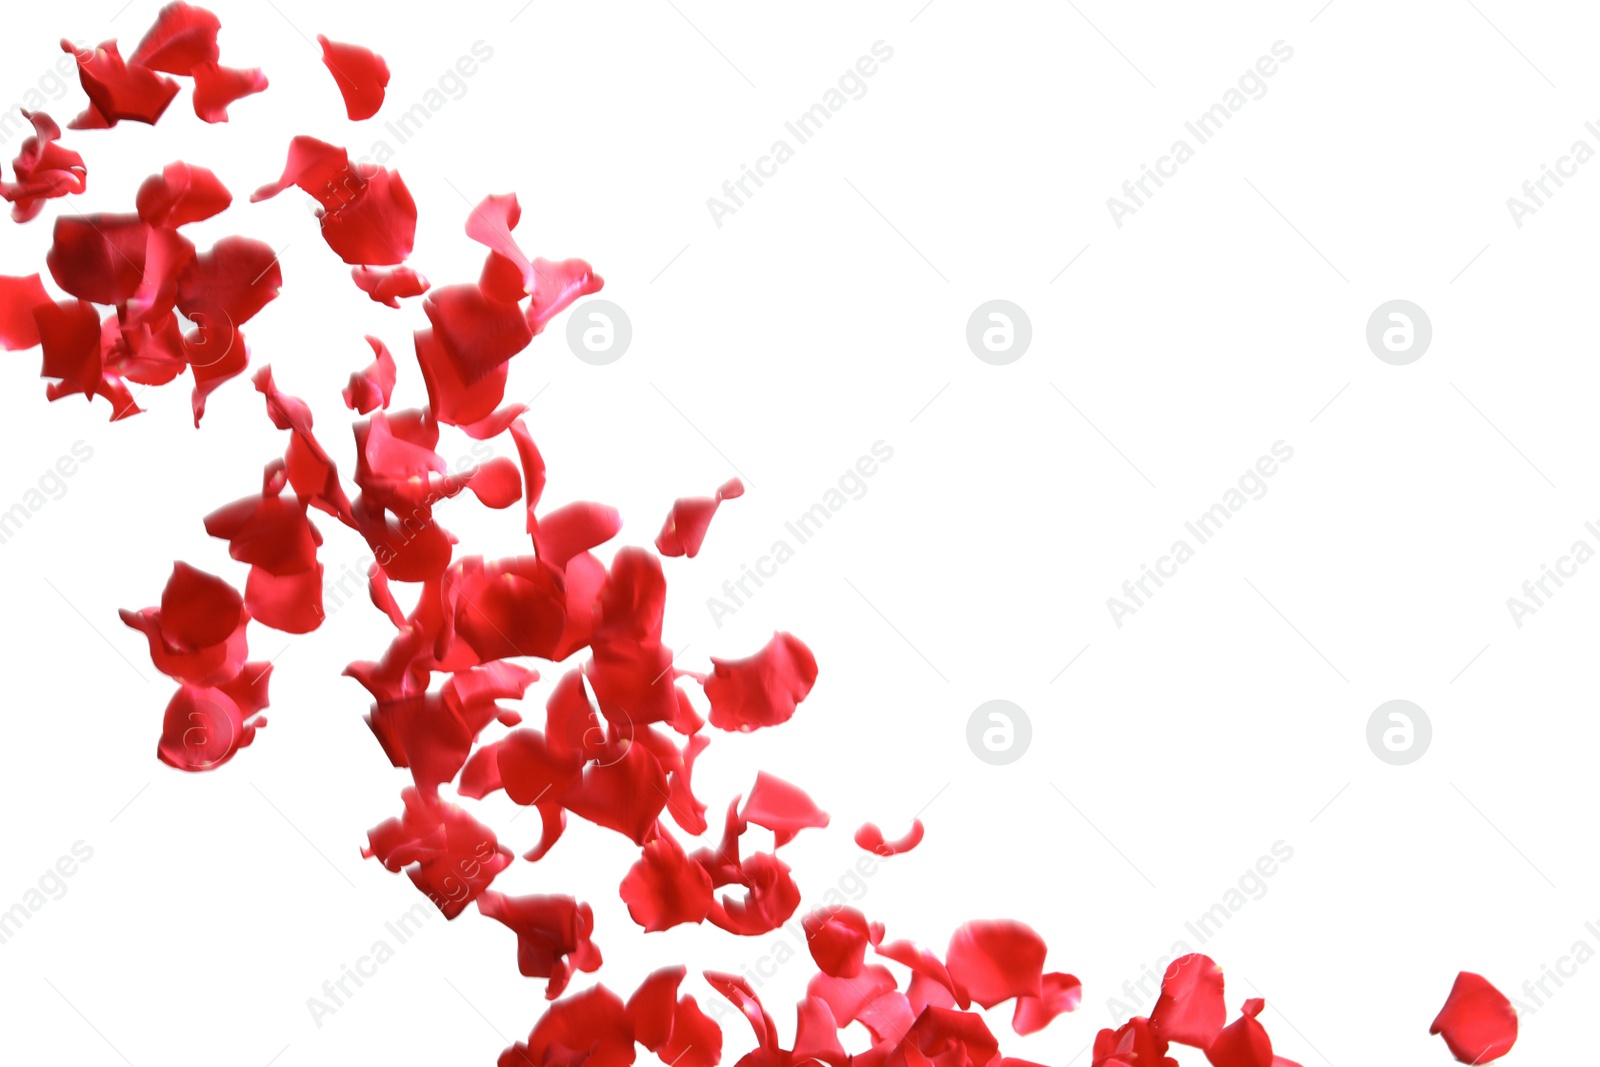 Photo of Red rose petals falling on white background